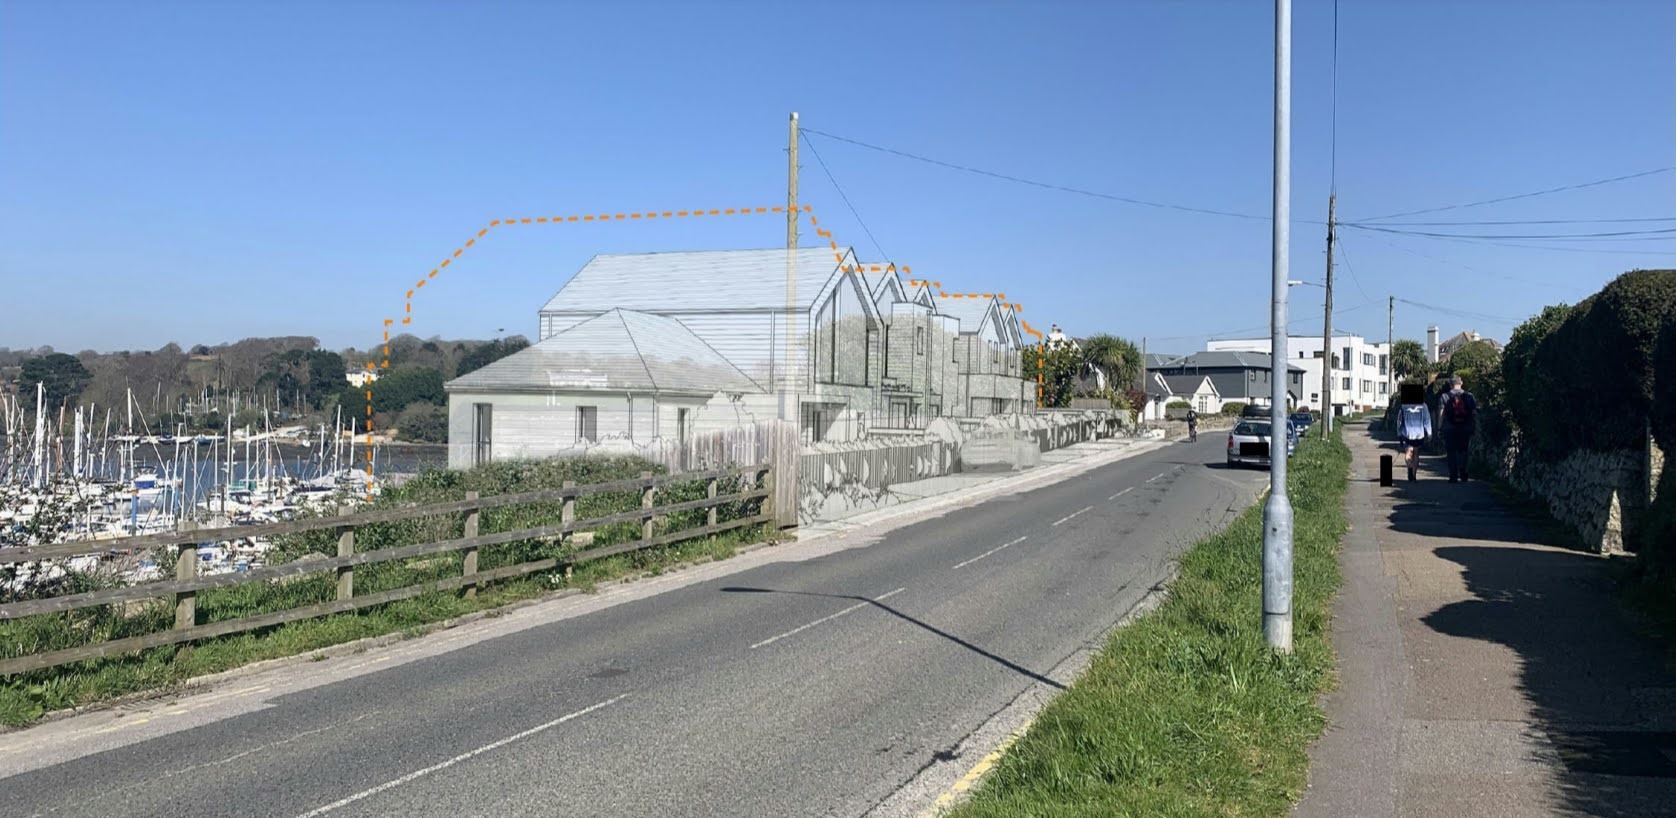 Composite photo showing plans for new homes in North Parade, Falmouth, which have been refused planning permission